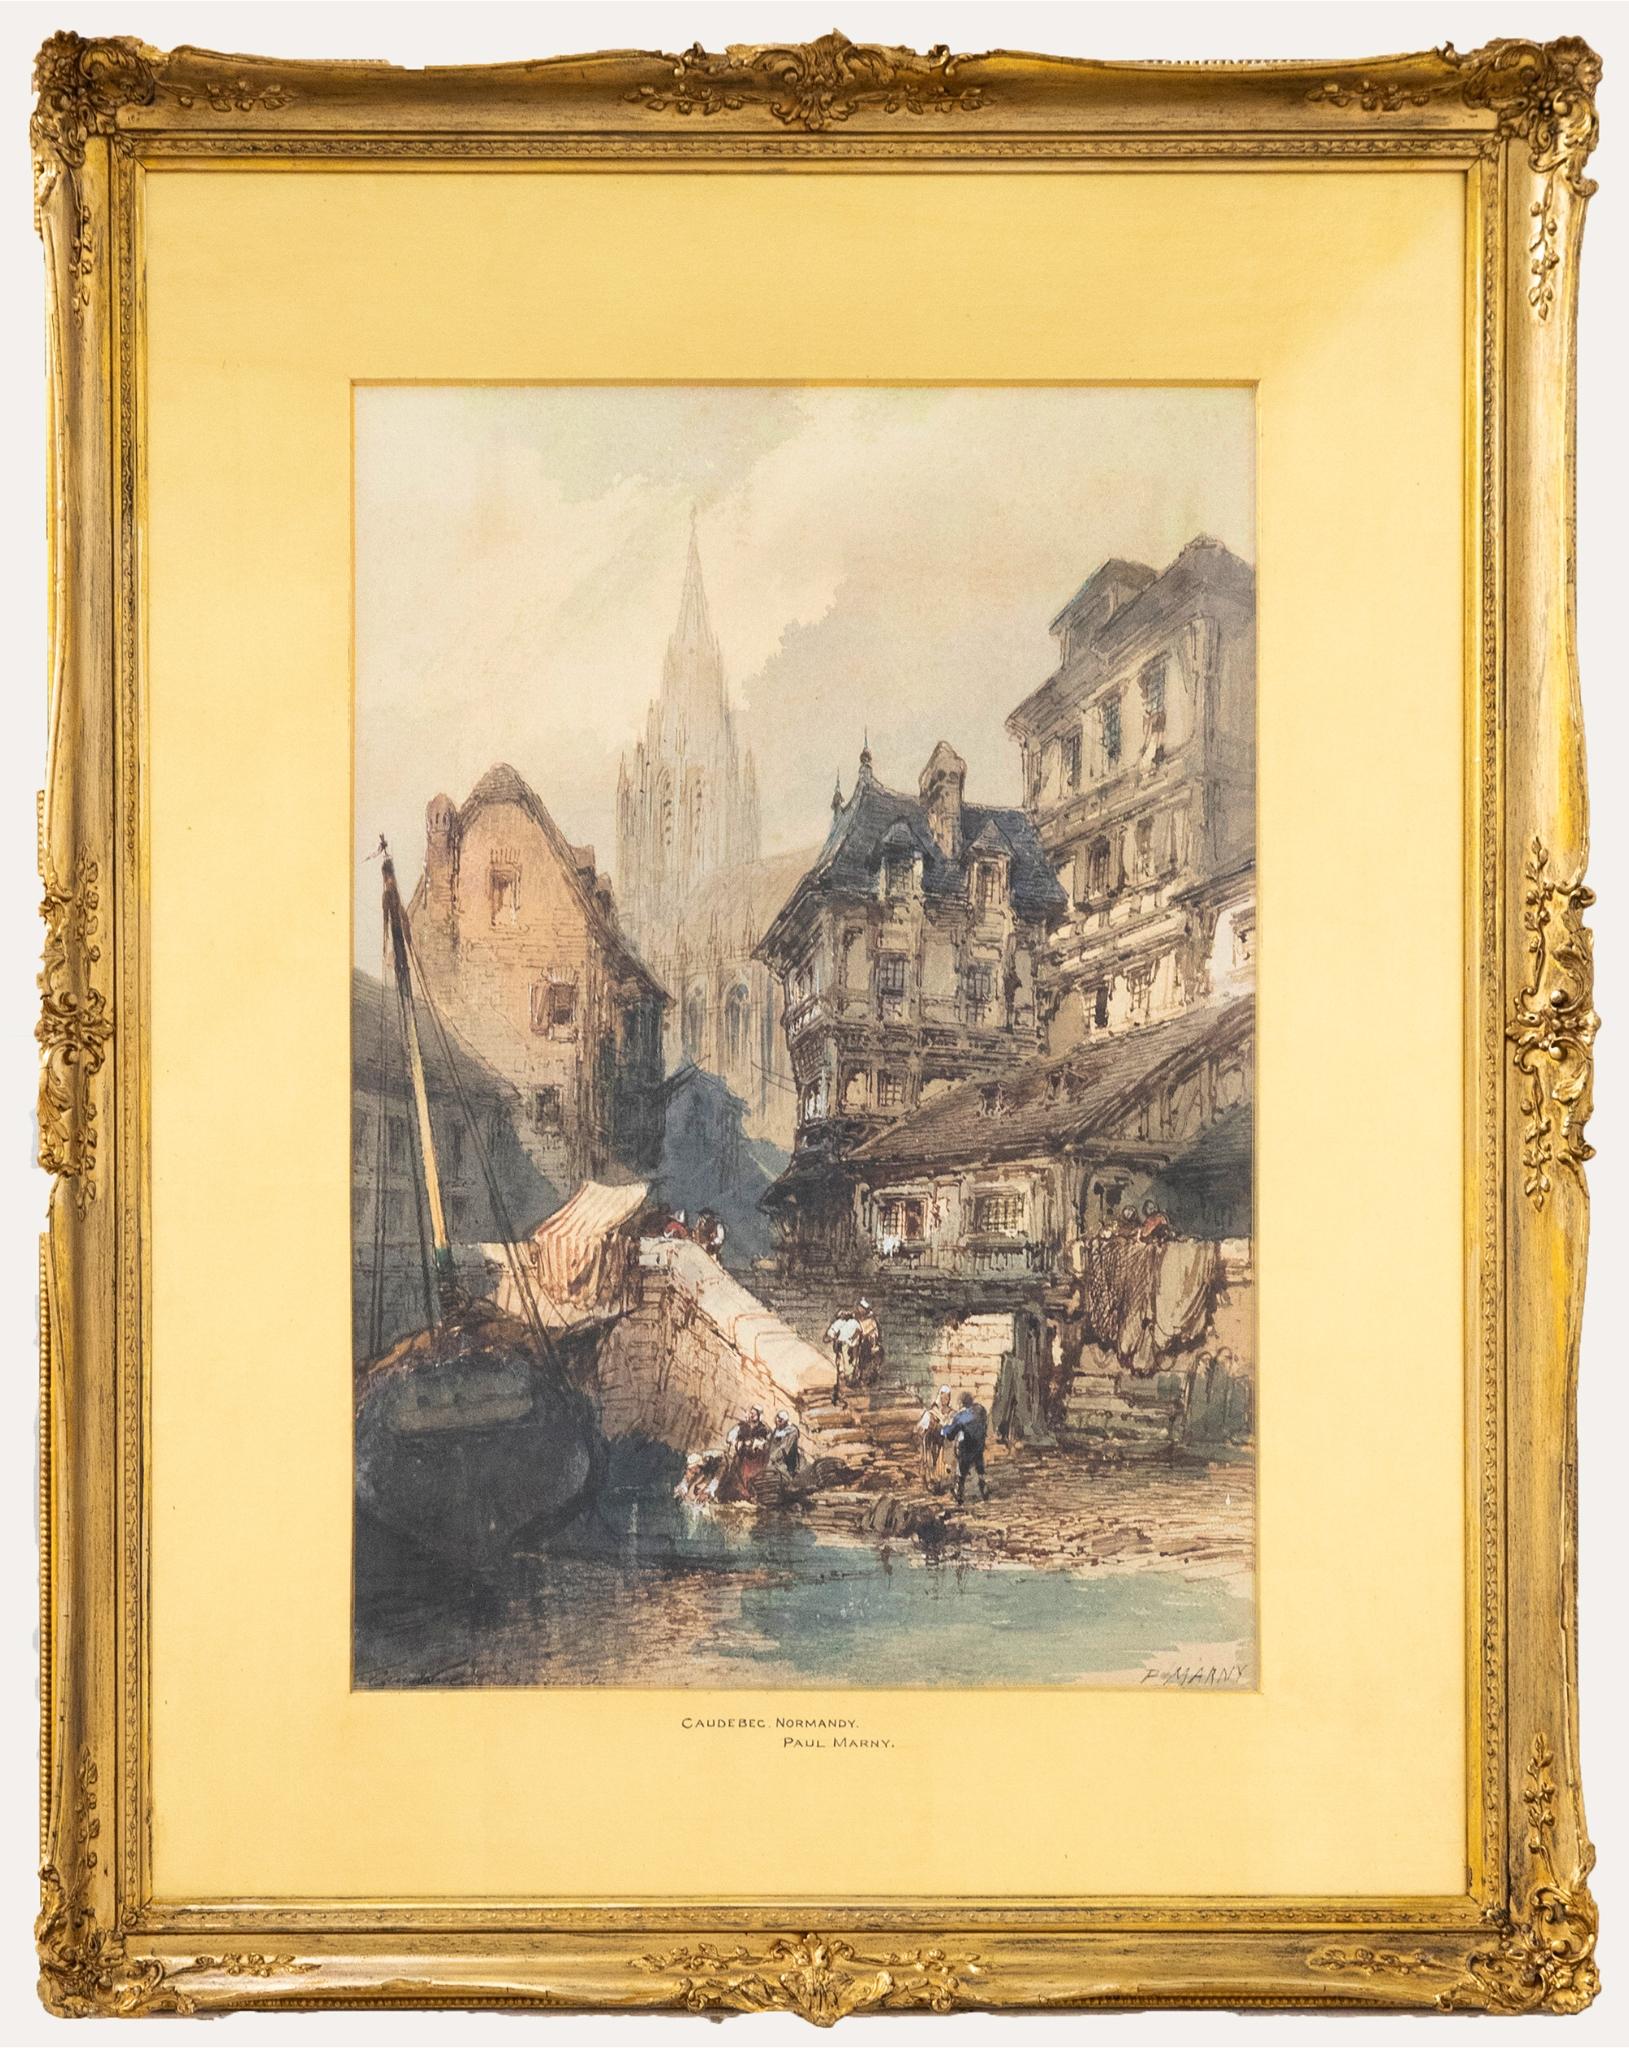 A charming 19th century view of Caudebec, Normandy. The artist has wonderfully captured the complex medieval architecture and bustling nature of this large French town. The artist has signed the scene to the lower right and inscribed the location to